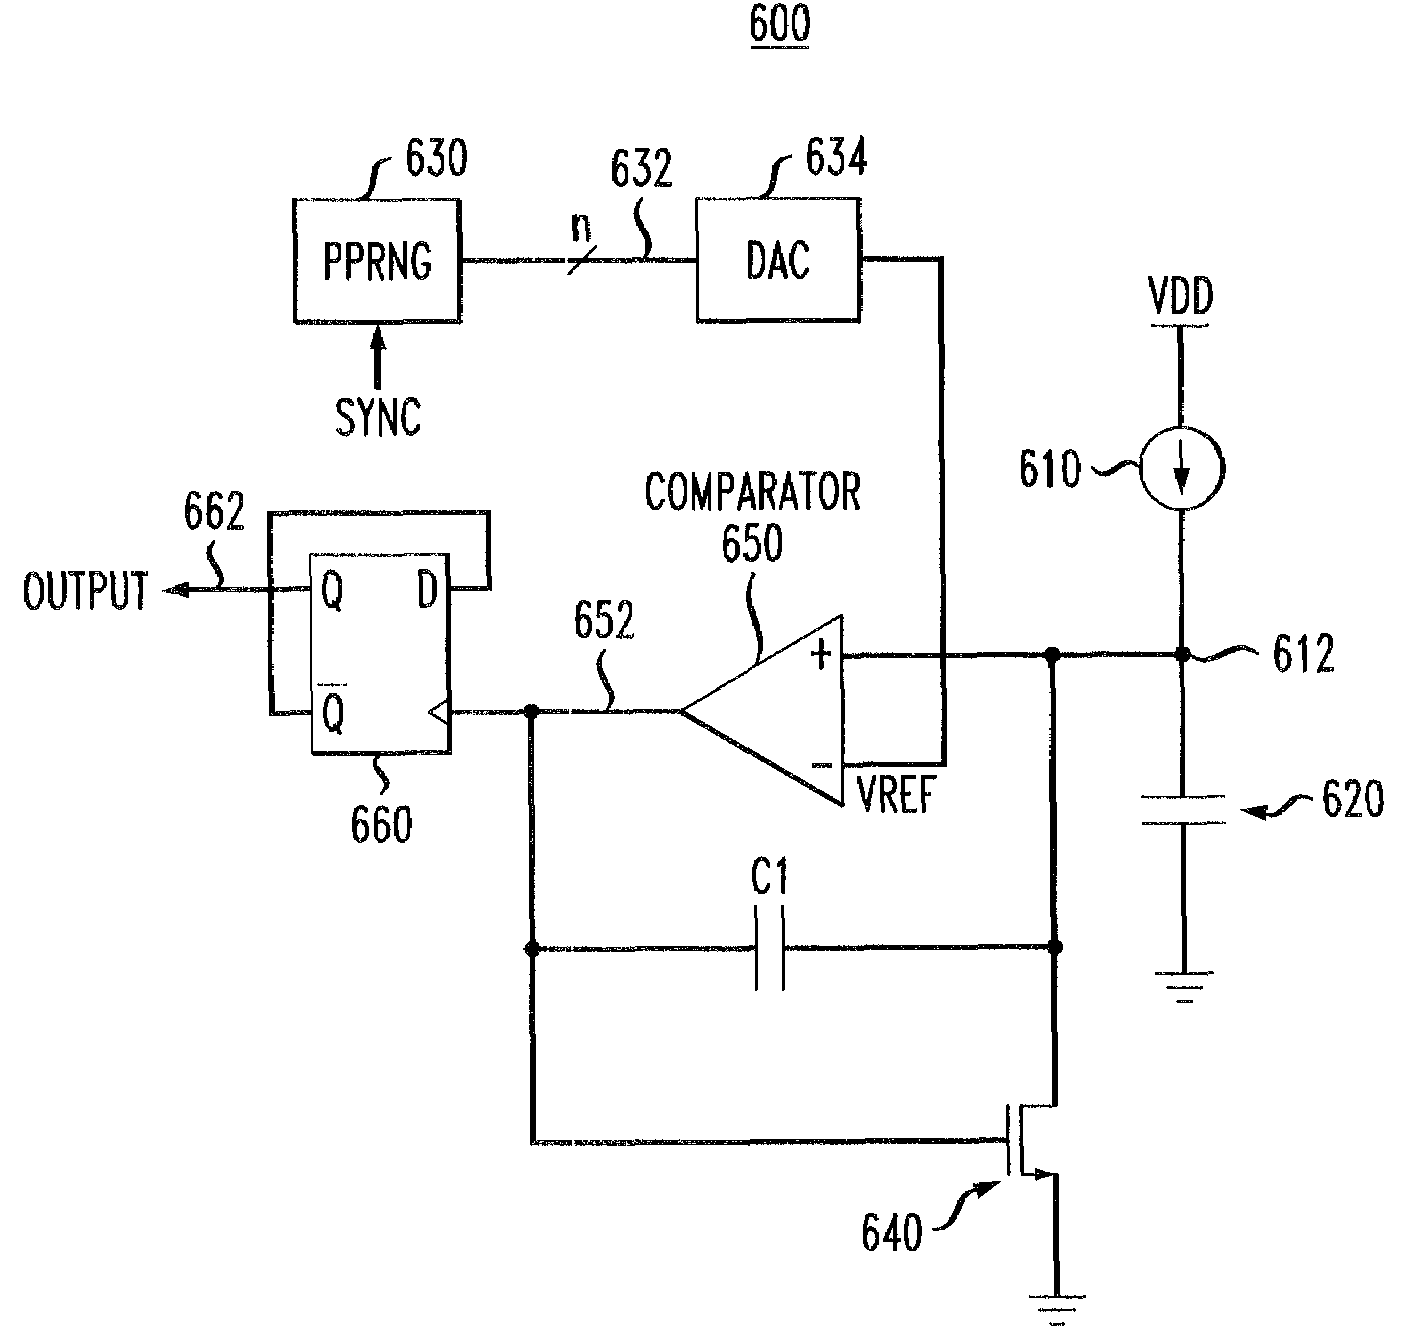 Switched-current oscillator for clock-frequency spreading